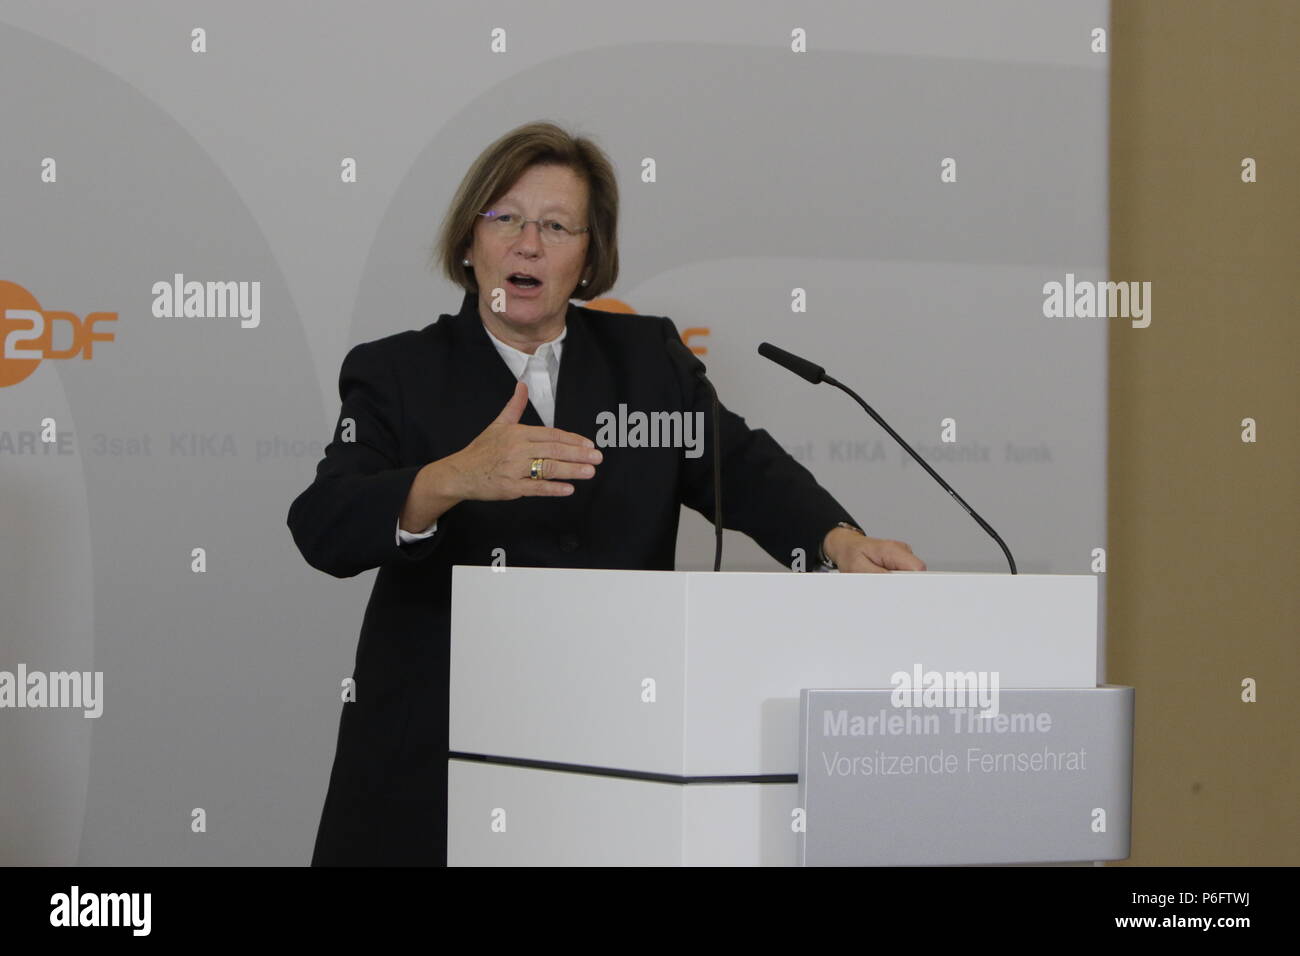 Mainz, Germany. 29th June, 2018. Marlehn Thieme, the chairwoman of the ZDF Television Board (ZDF-Fernsehrat), addresses the press conference. The Television Board of the German public-service television broadcaster ZDF (Zweites Deutsches Fernsehen) met for their 9. meeting of its XV. term of office in Mainz. The chairwoman of the Television Board Marlehn Thieme was re-elected to her position in the scheduled midterm election of the 3 seats of the presidium. Credit: Michael Debets/Pacific Press/Alamy Live News Stock Photo